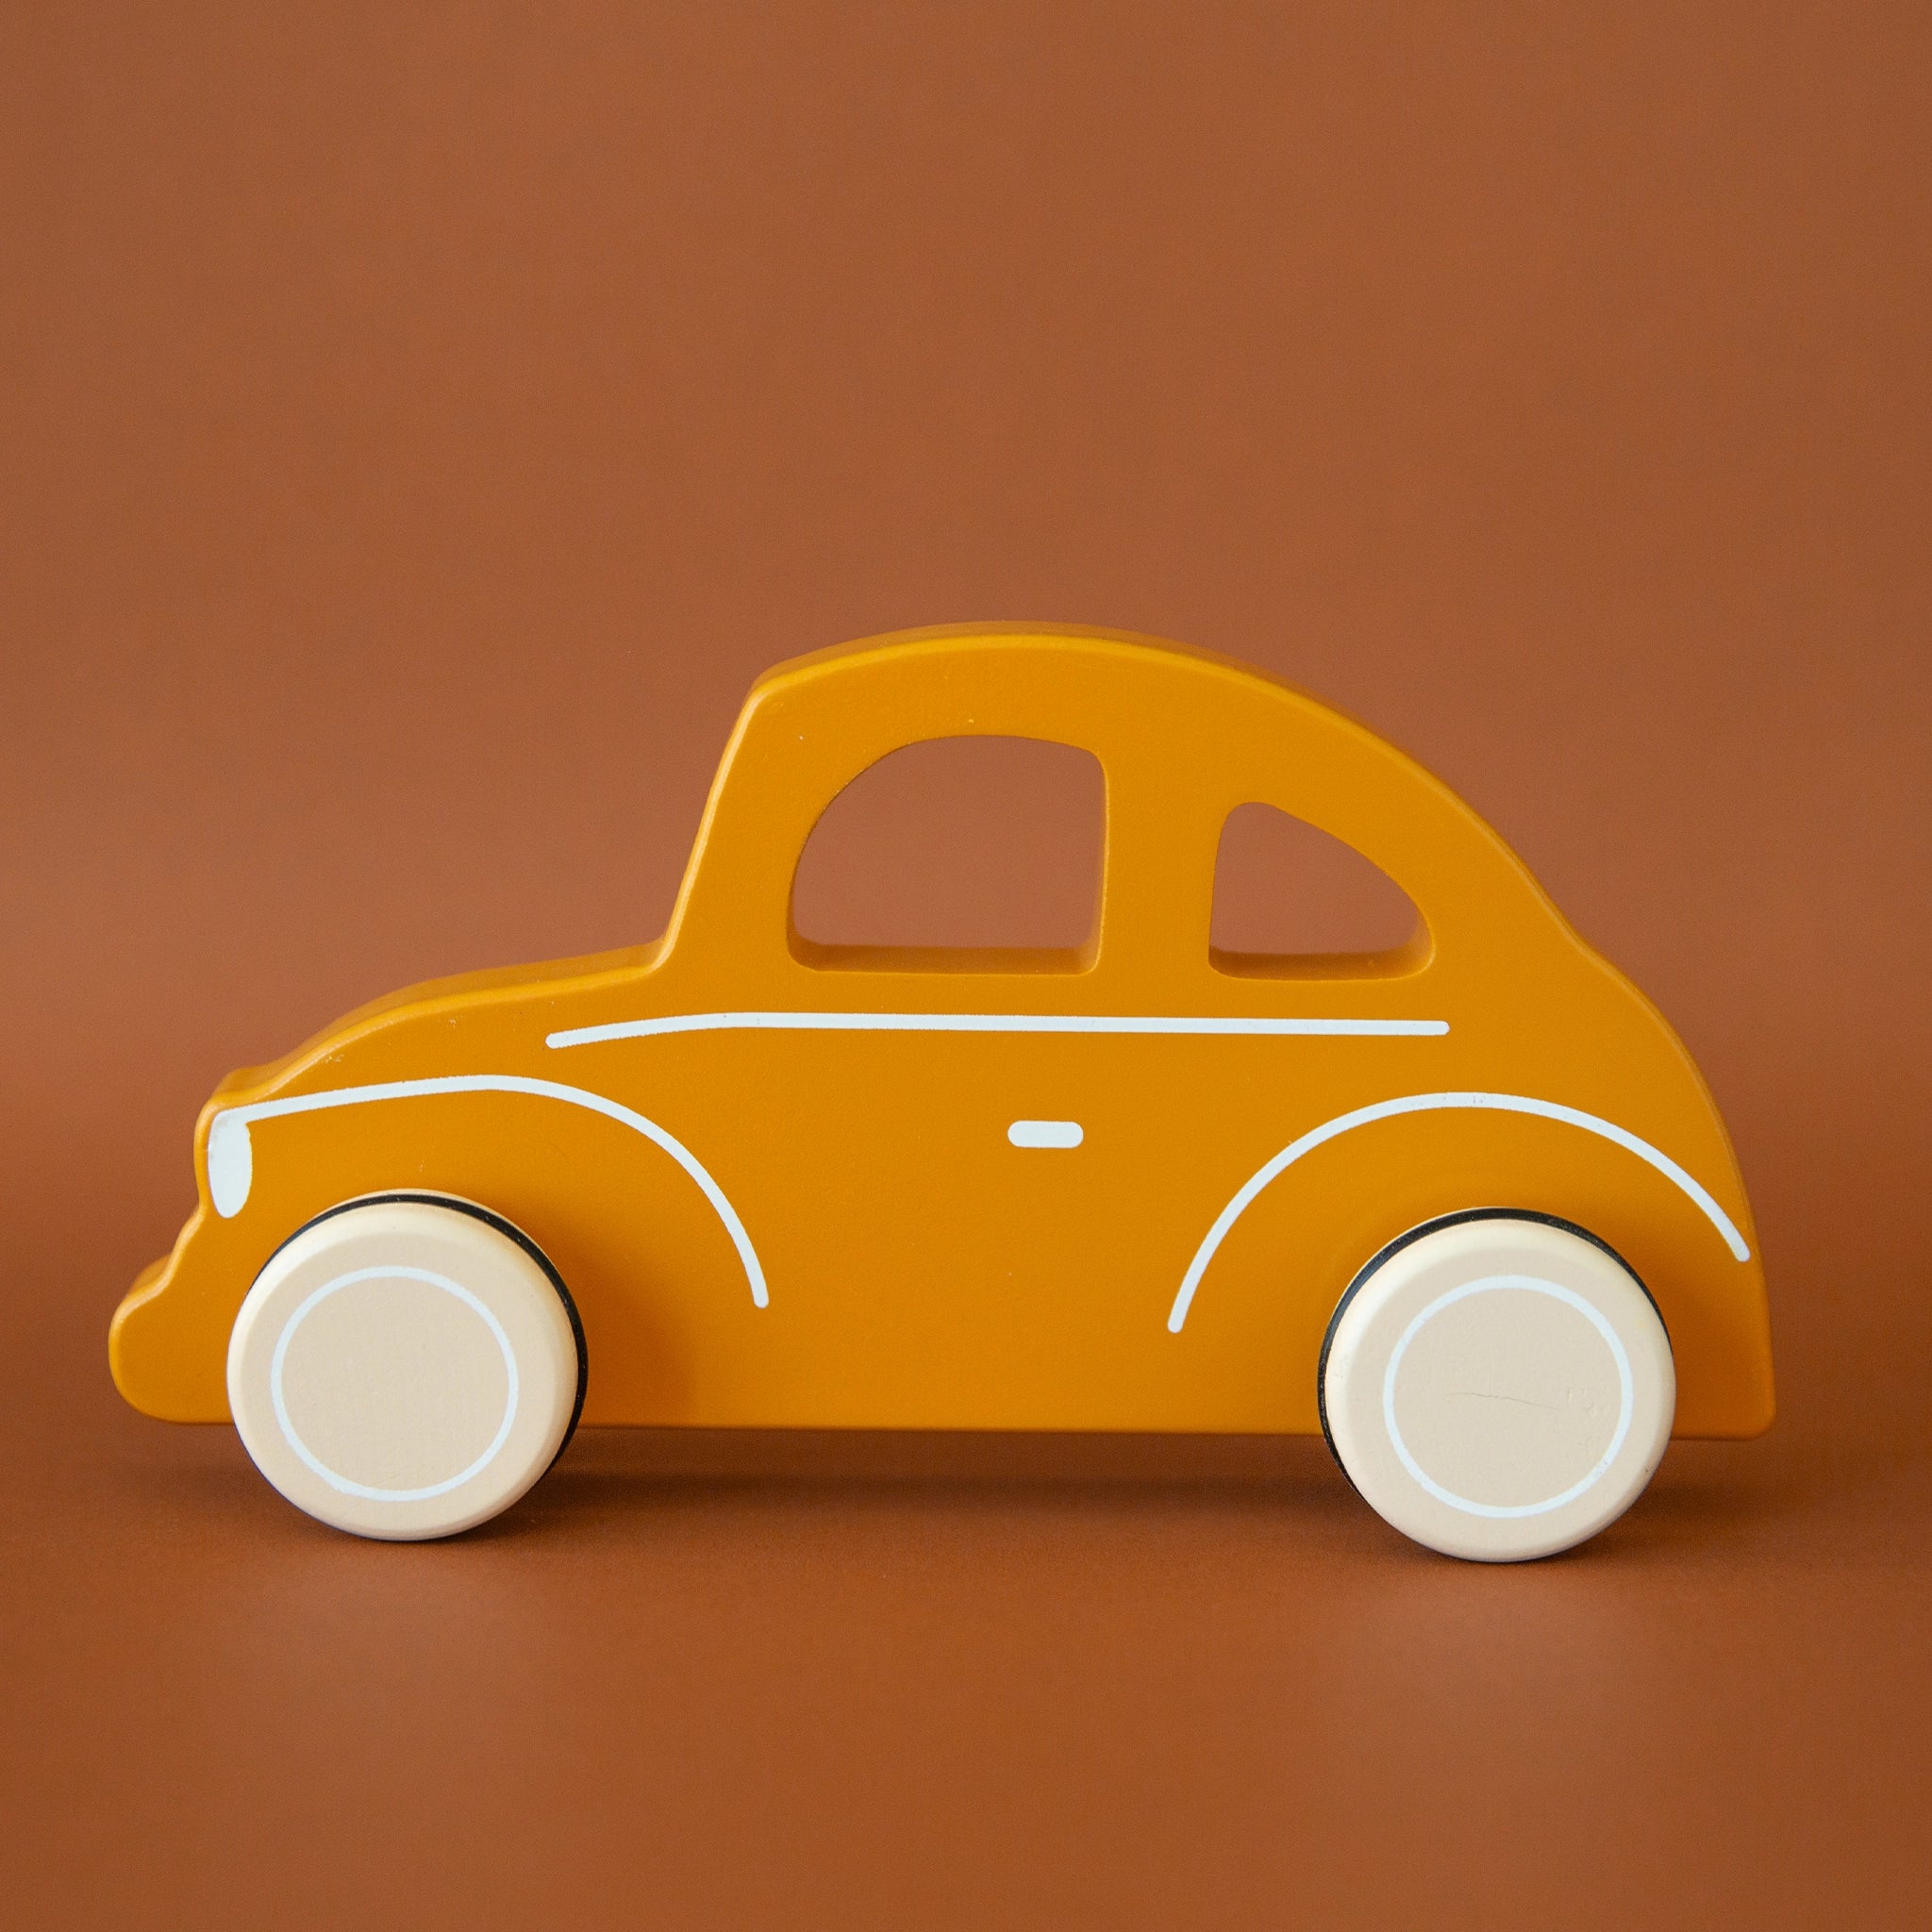 On a burnt orange background is a orange wood hand car toy with white wheels and accents. 